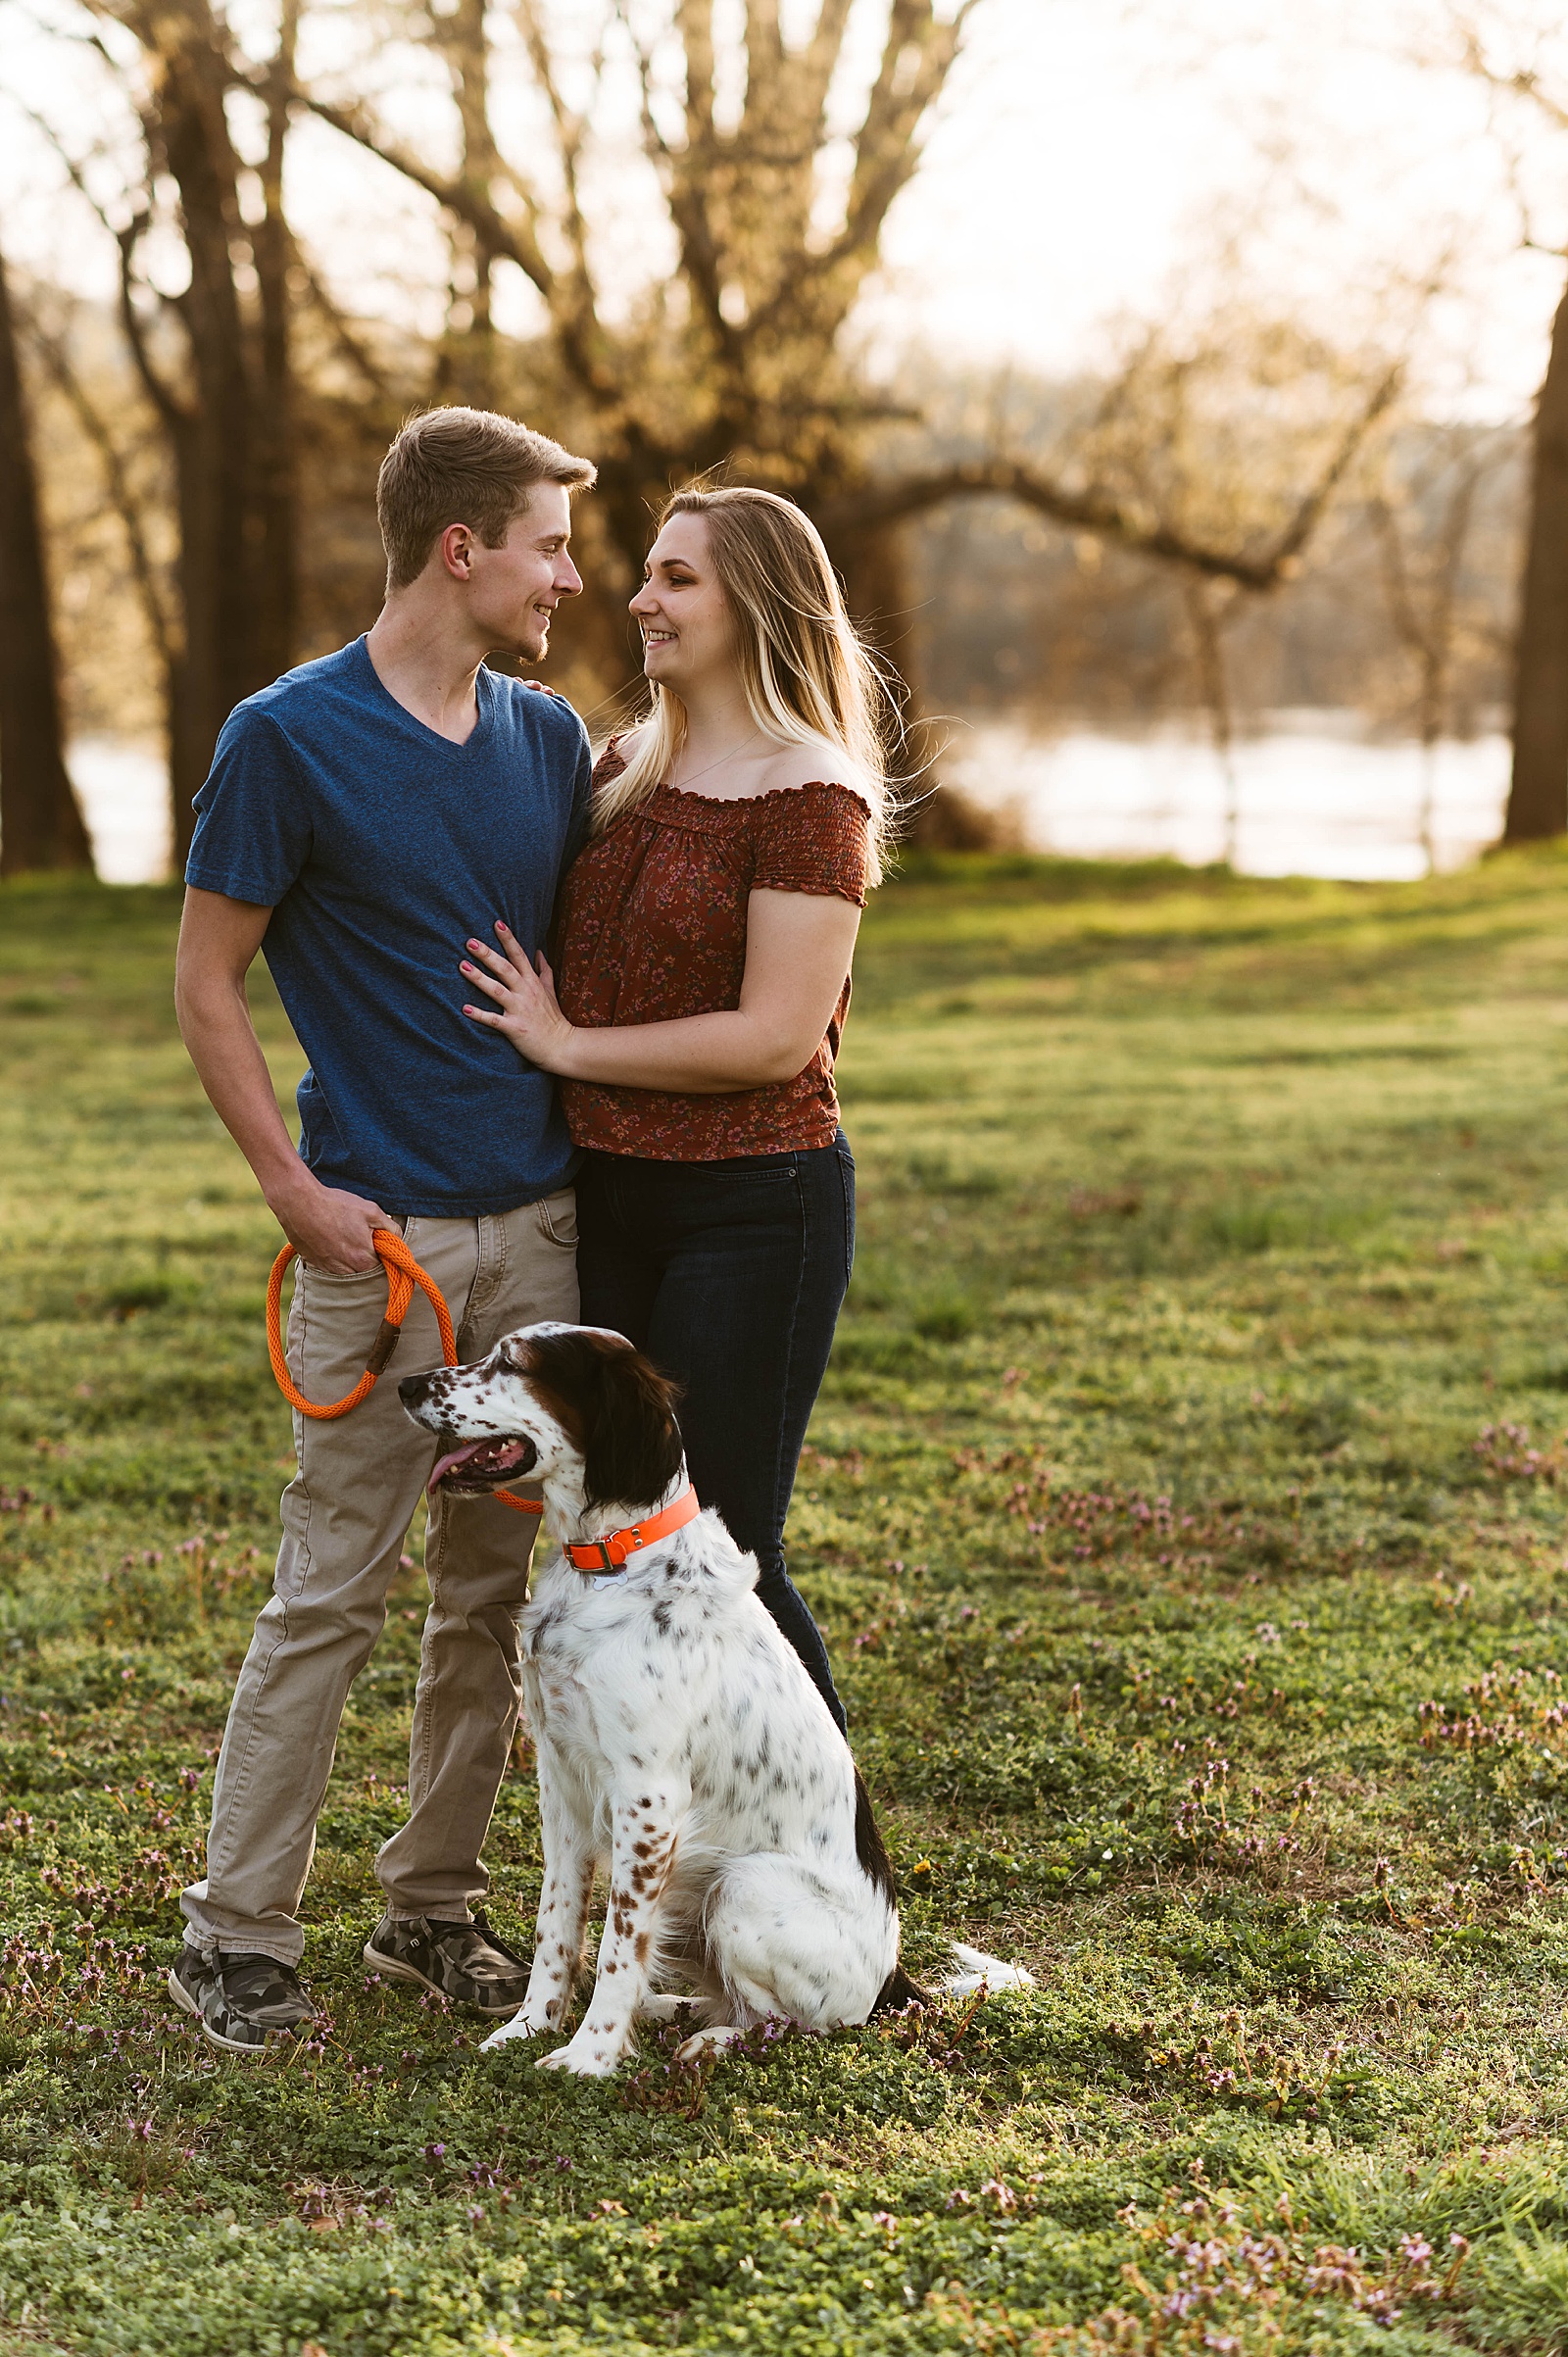 Blonde couple at park for couples shoot with their dog